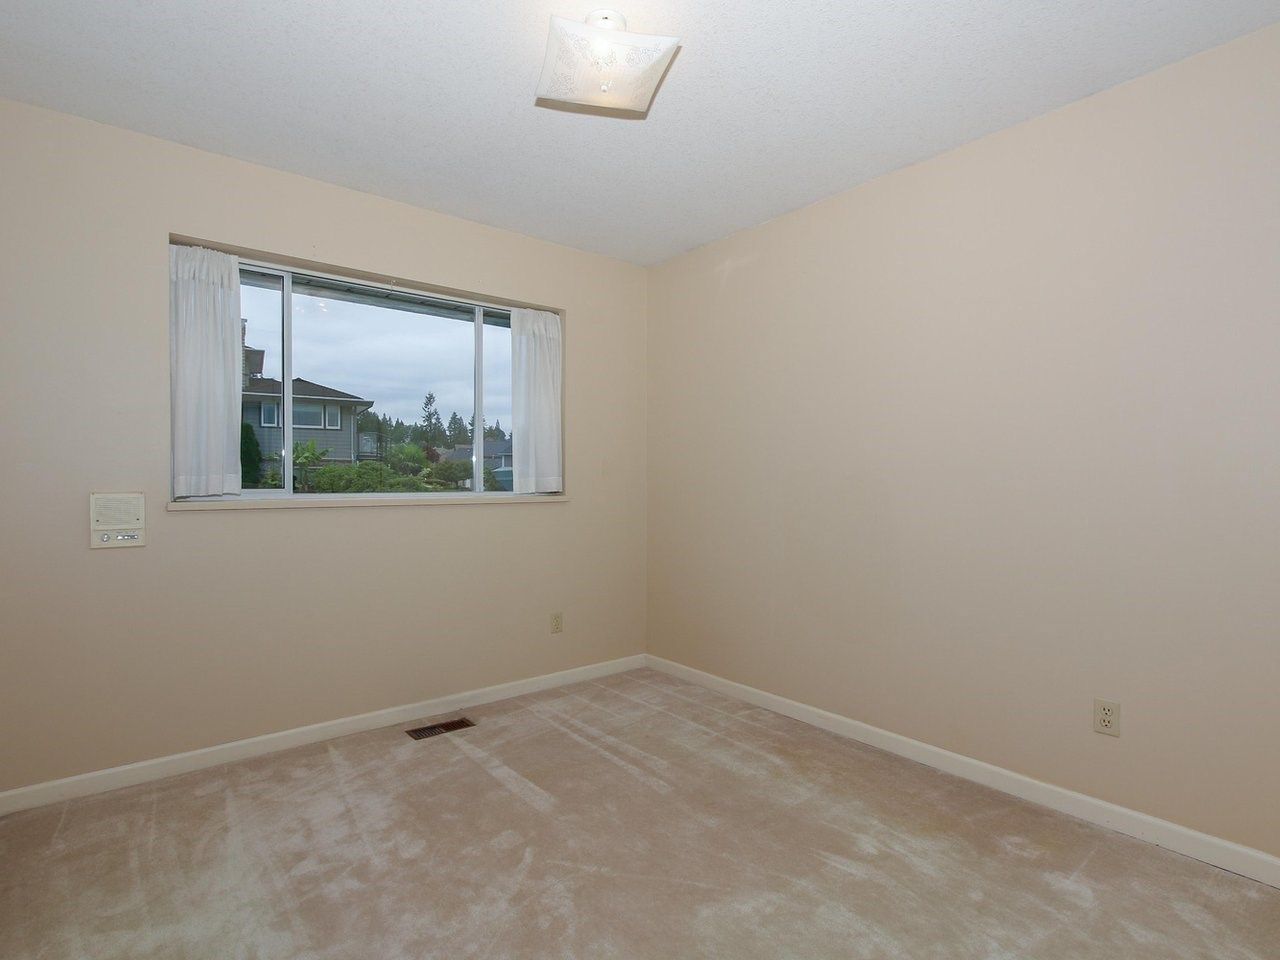 Photo 16: Photos: 601 CLEARWATER Way in Coquitlam: Coquitlam East House for sale : MLS®# R2383700